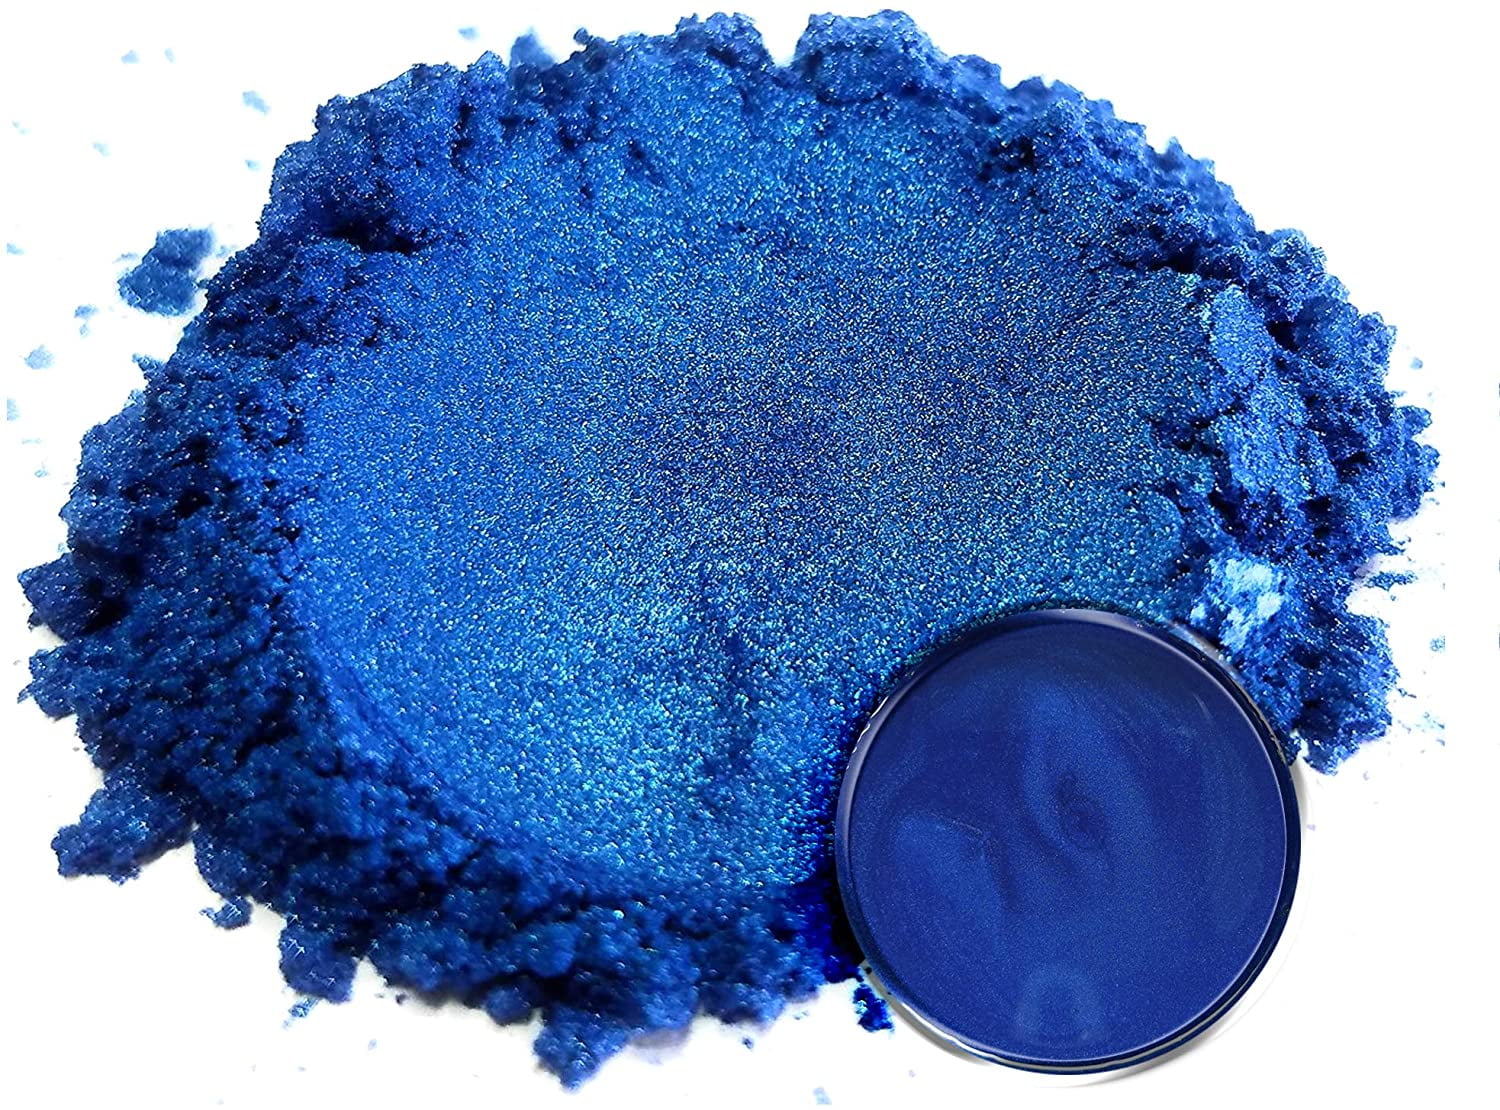 Eye Candy Mica Powder - Neon Pigment, Colorant for Epoxy, Resin,  Woodworking, Soap Molds, Candle Making, Slime, Bath Bombs, Nail Polish,  Cosmetic